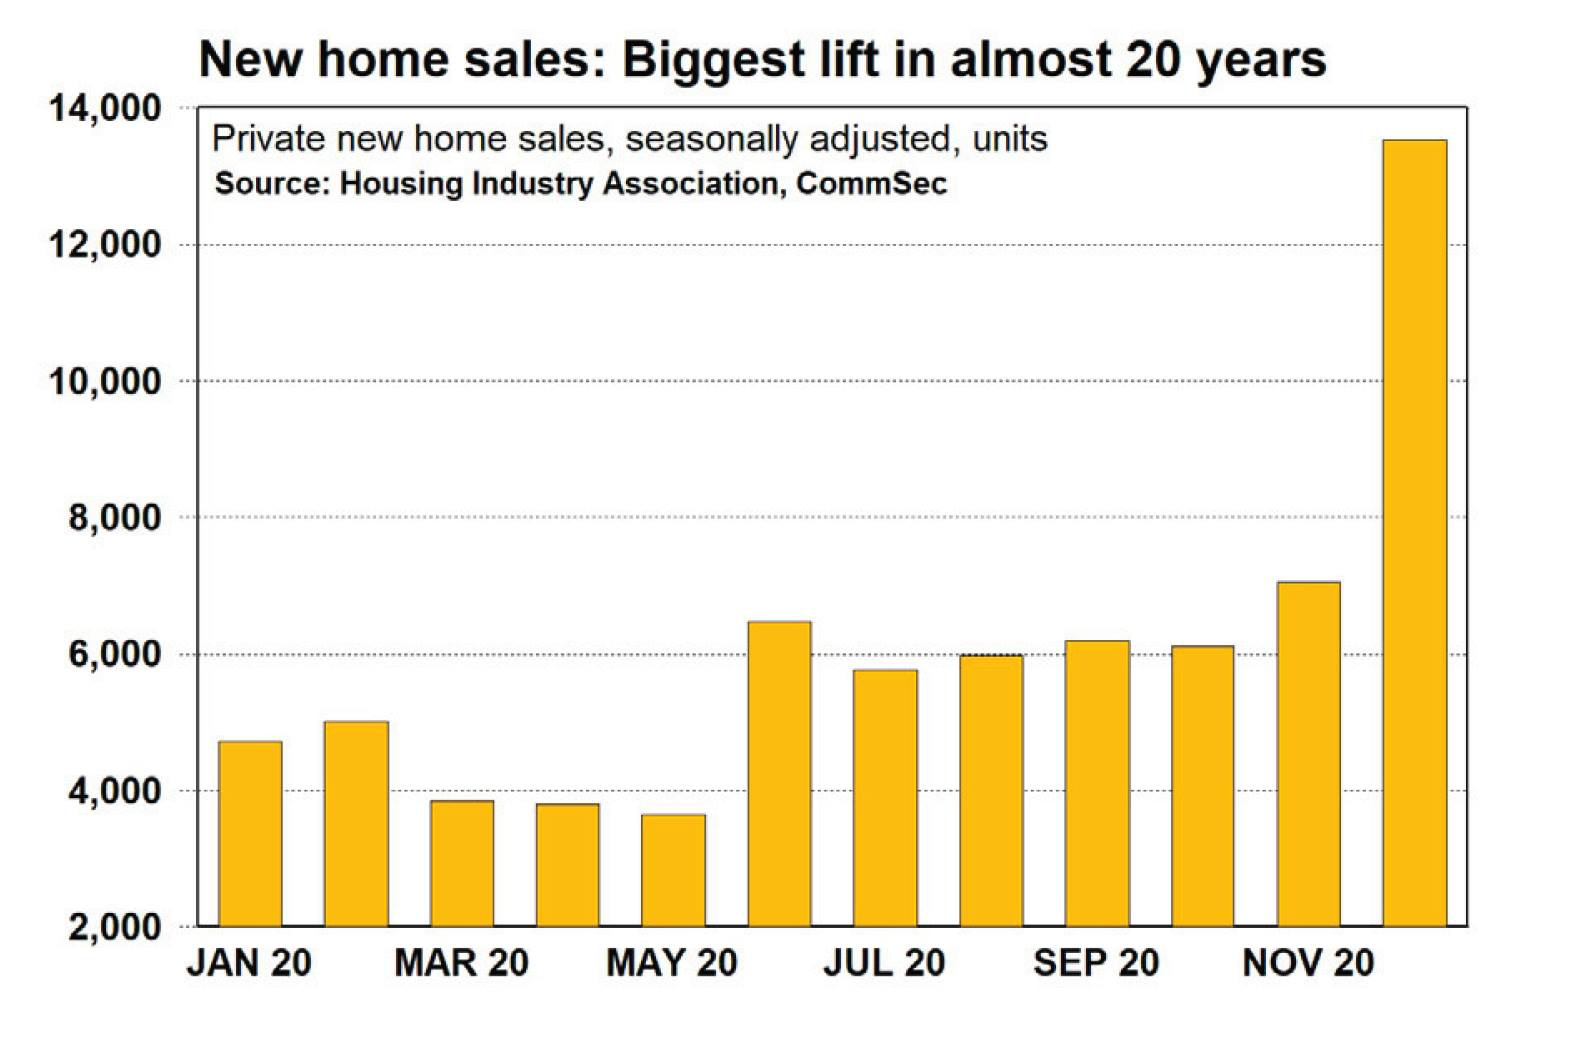 New home sales: Biggest lift in almost 20 years